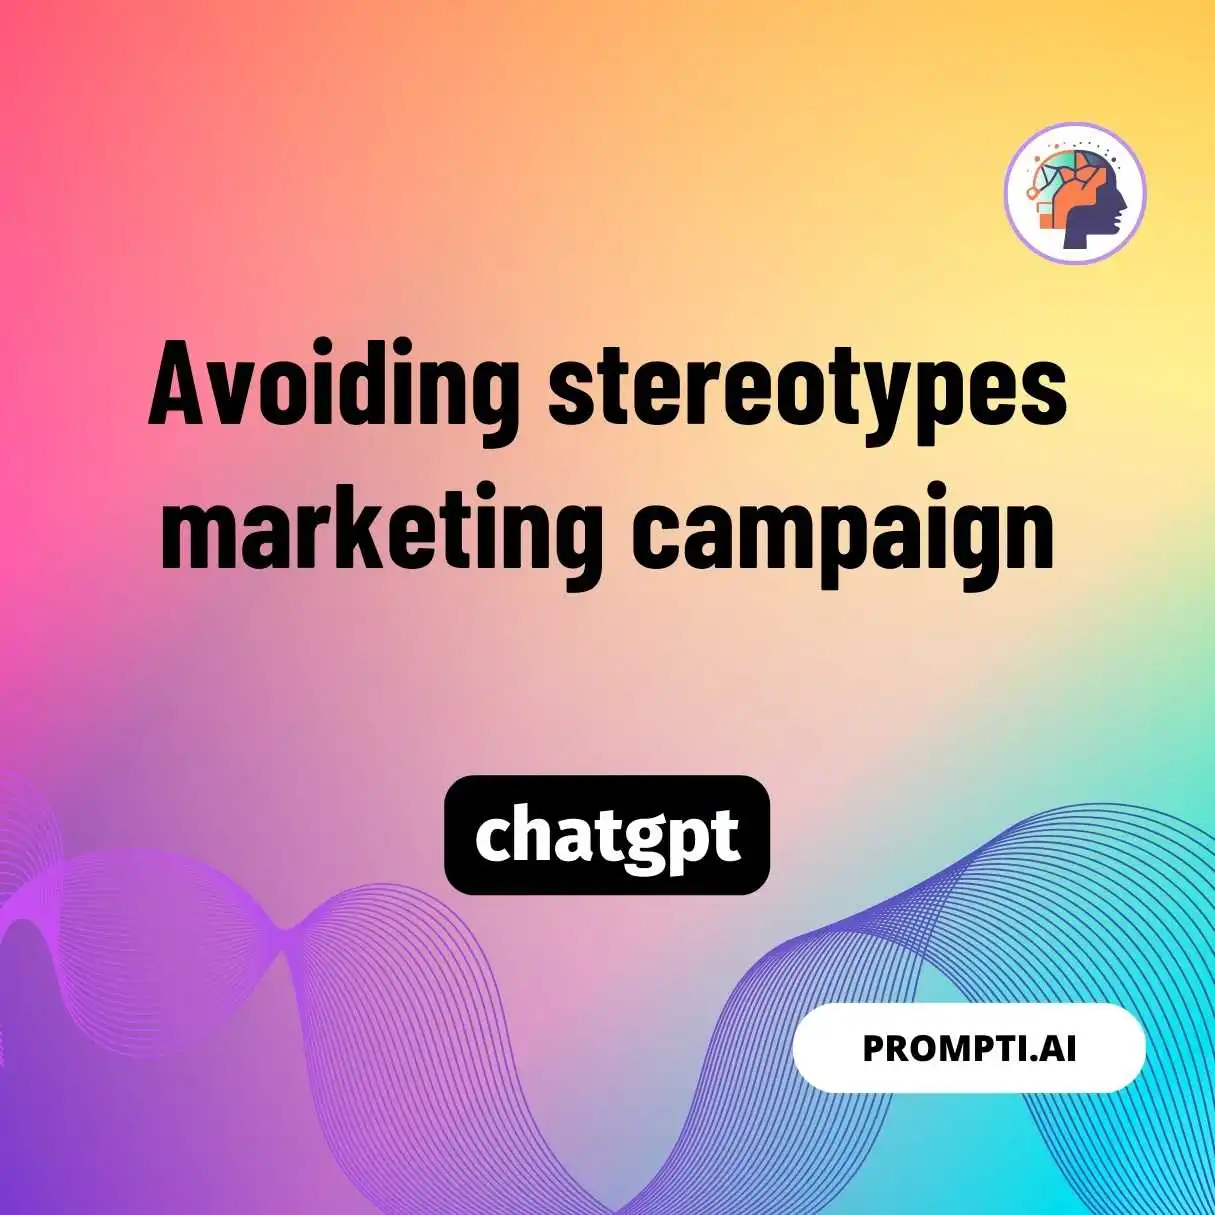 Avoiding stereotypes marketing campaign